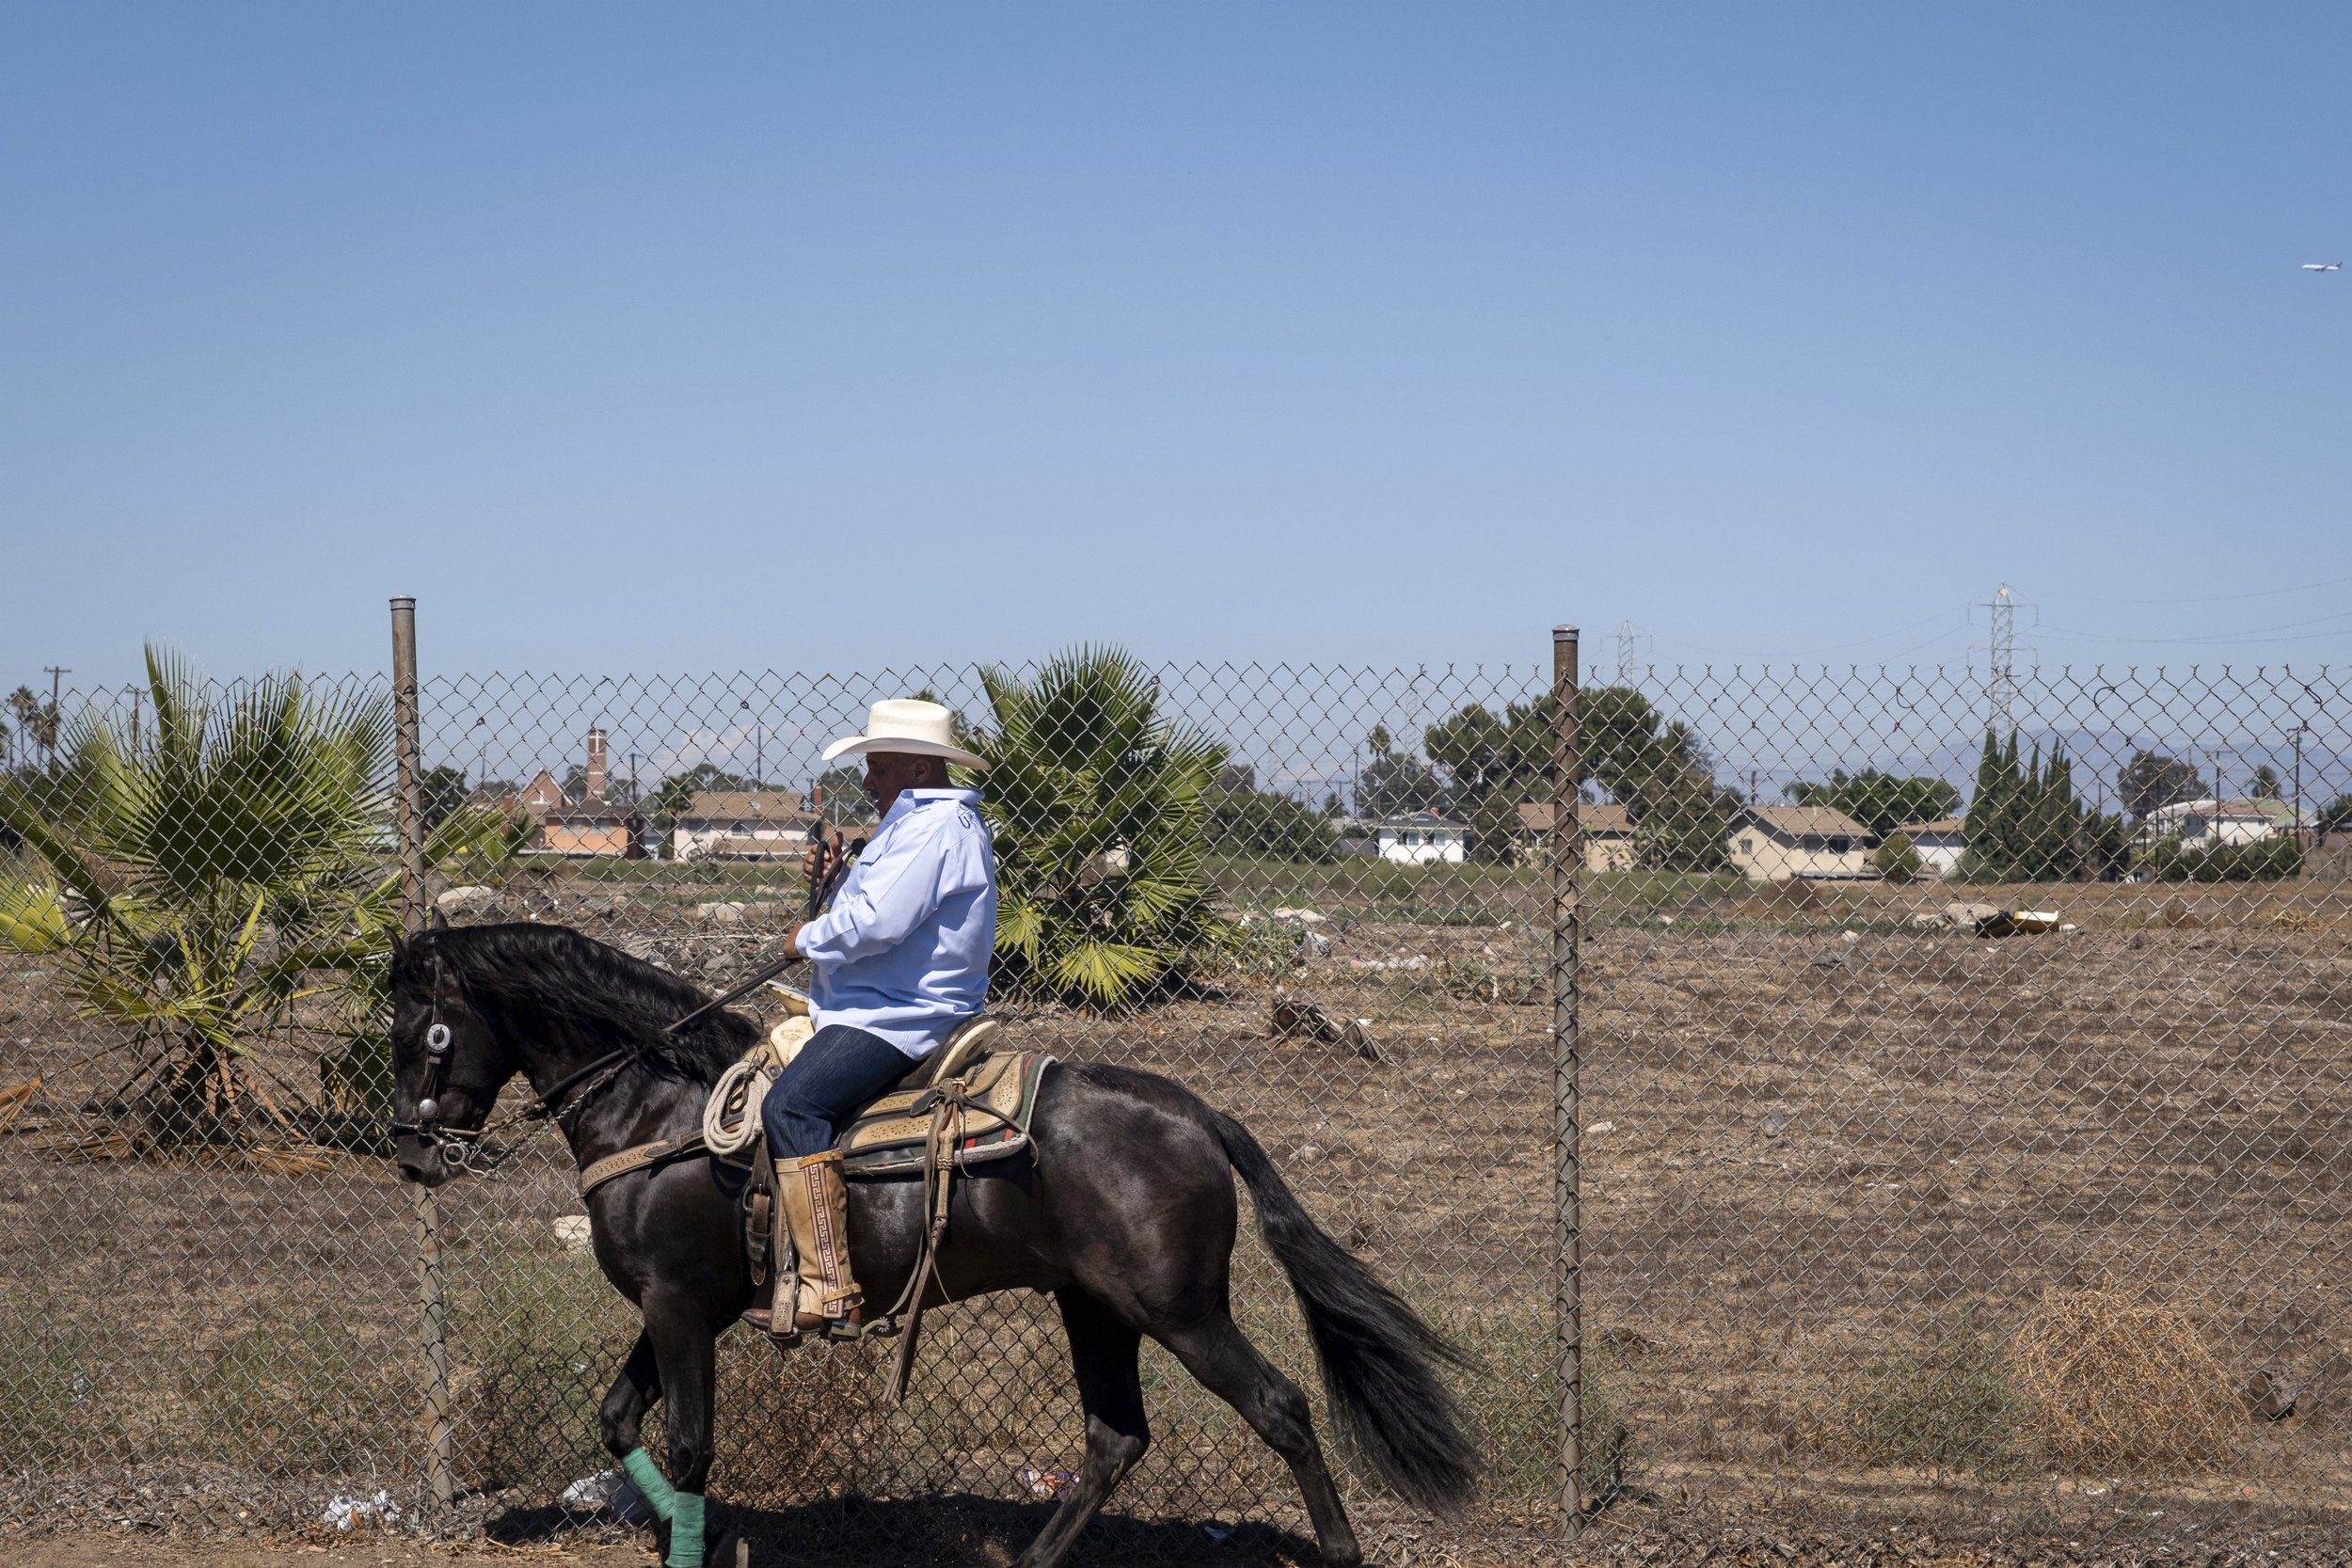  A lone rider canters past the empty land site in Compton, Calif., on Sunday, Sept 25. (Anna Sophia Moltke | The Corsair) 